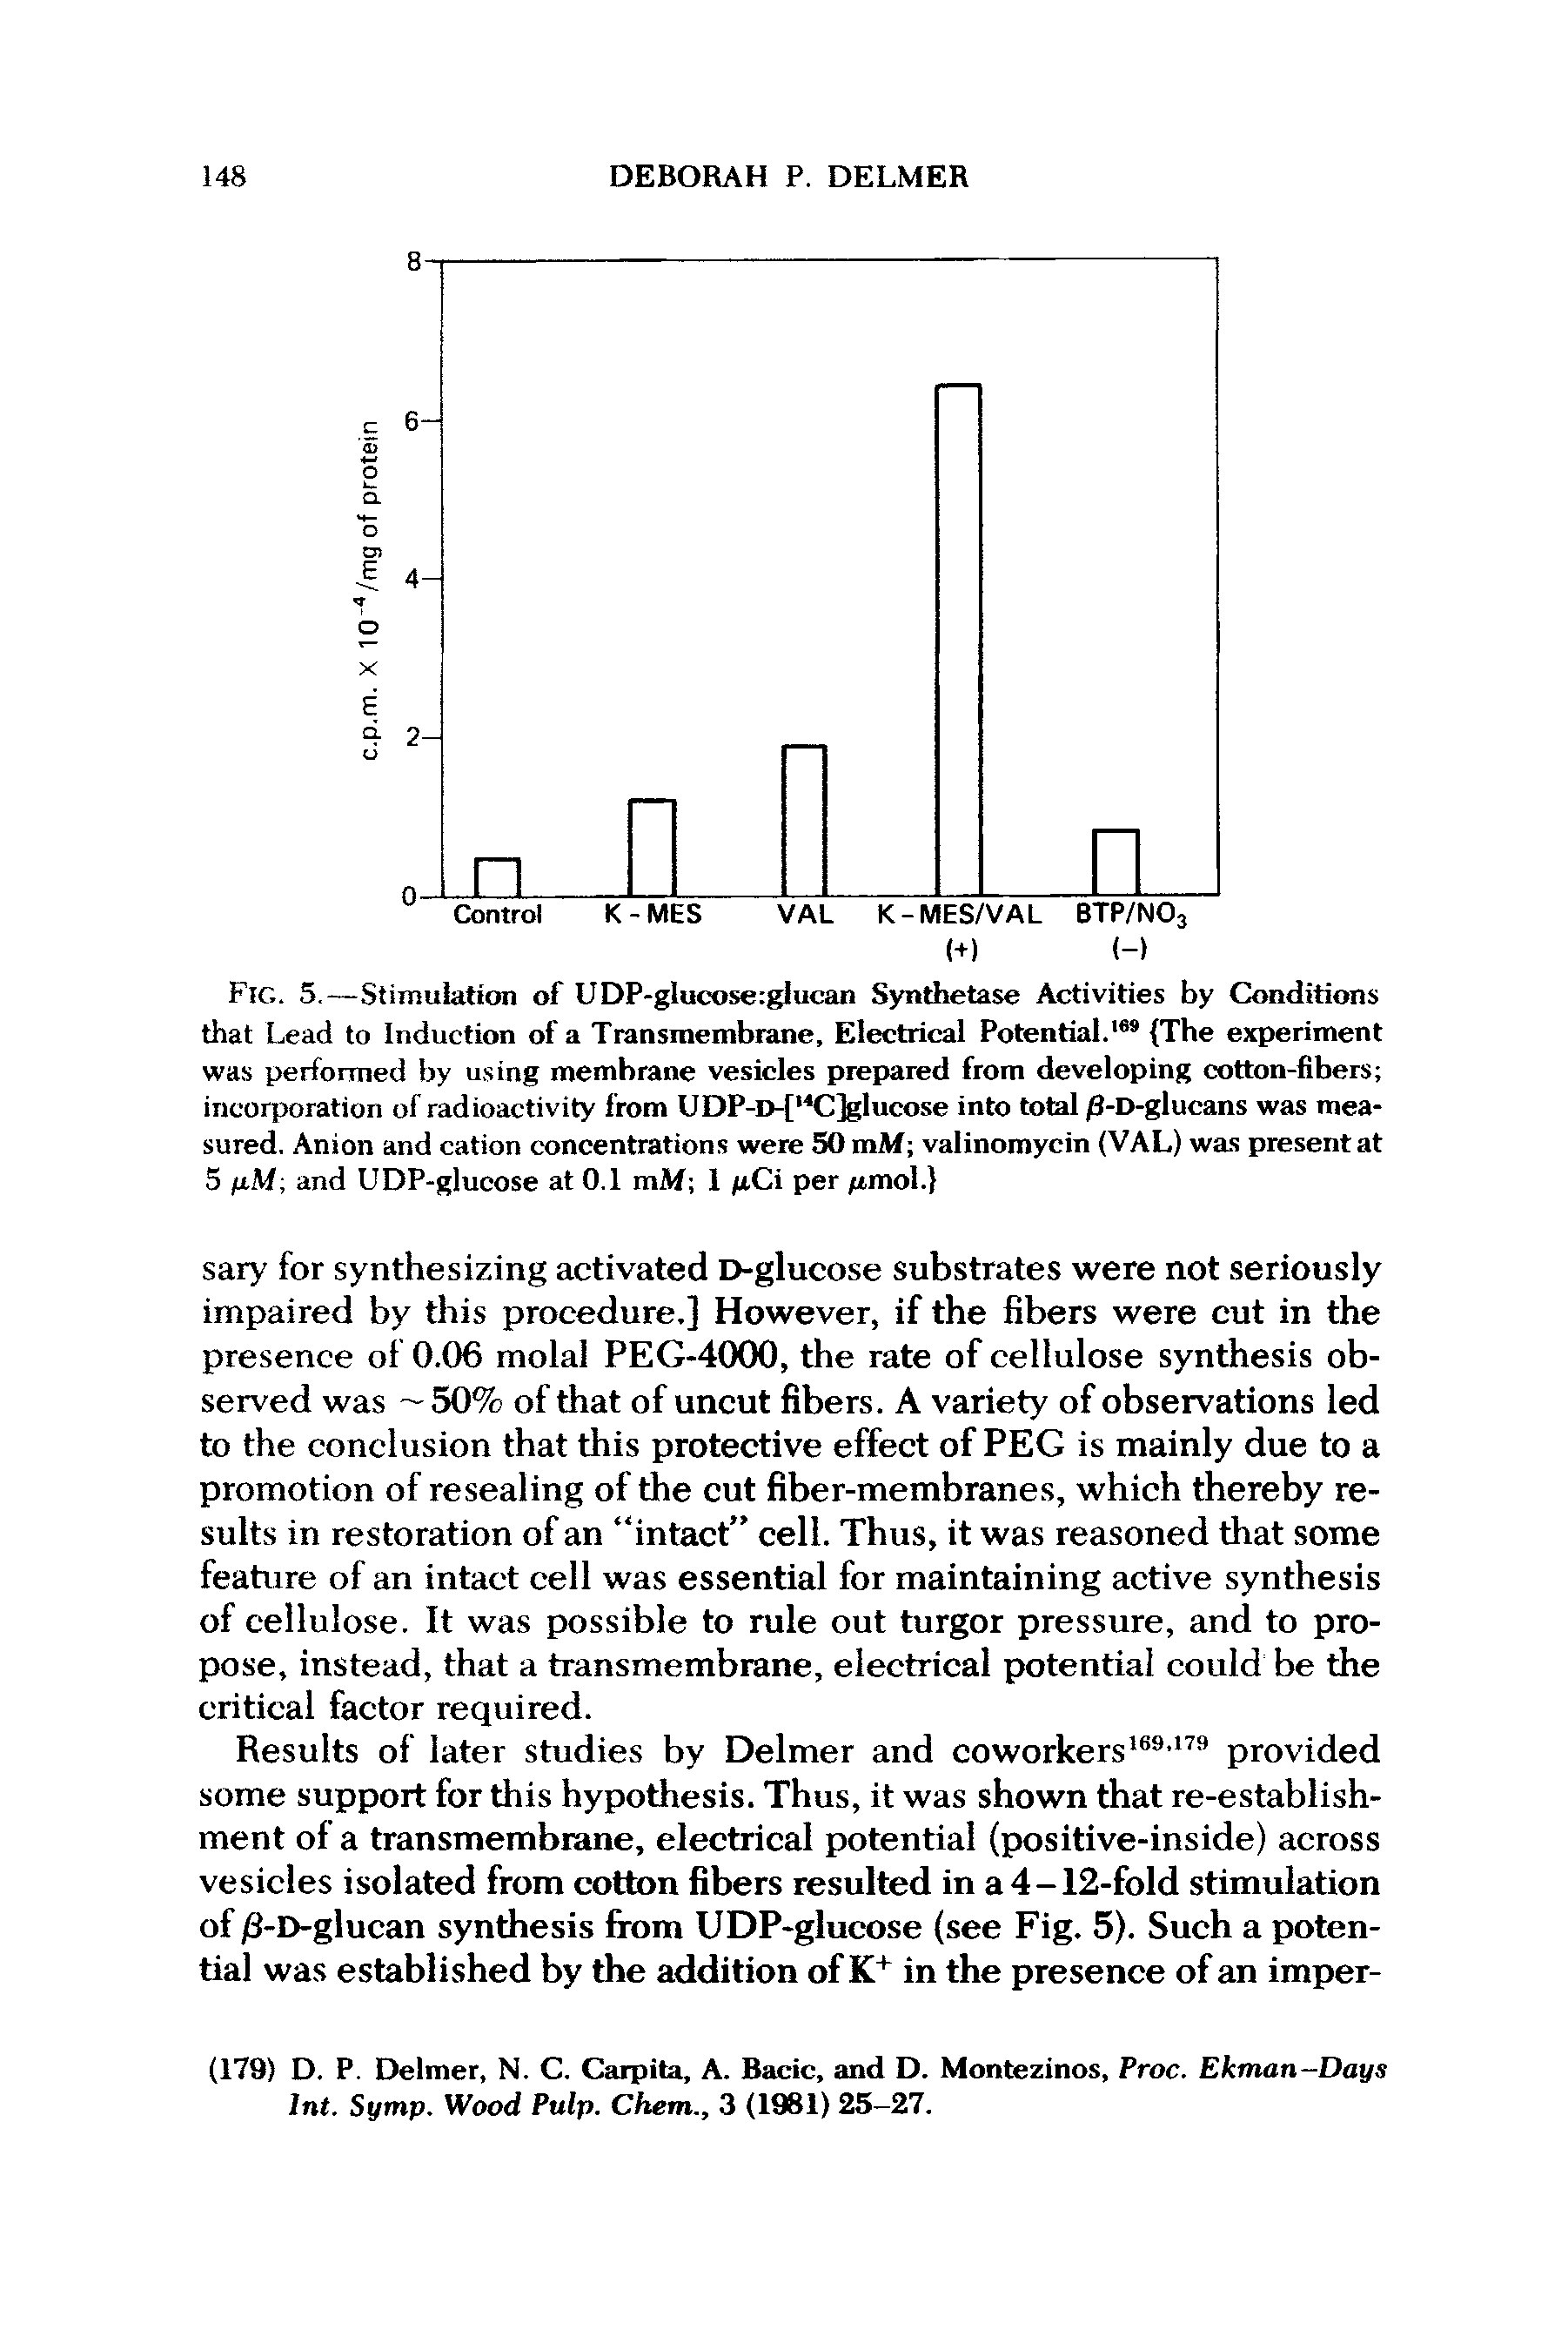 Fig. 5.—Stimulation of UDP-gIucose glucan Synthetase Activities by Conditions that Lead to Induction of a Transmembrane, Electrical Potential.169 The experiment was performed by using membrane vesicles prepared from developing cotton-fibers incorporation of radioactivity from UDP-D-[,4C]glucose into total /3-D-glucans was measured. Anion and cation concentrations were 50 mM valinomycin (VAL) was present at 5 u.M and UDP-glucose at 0.1 mM 1 /xCi per irmol. ...